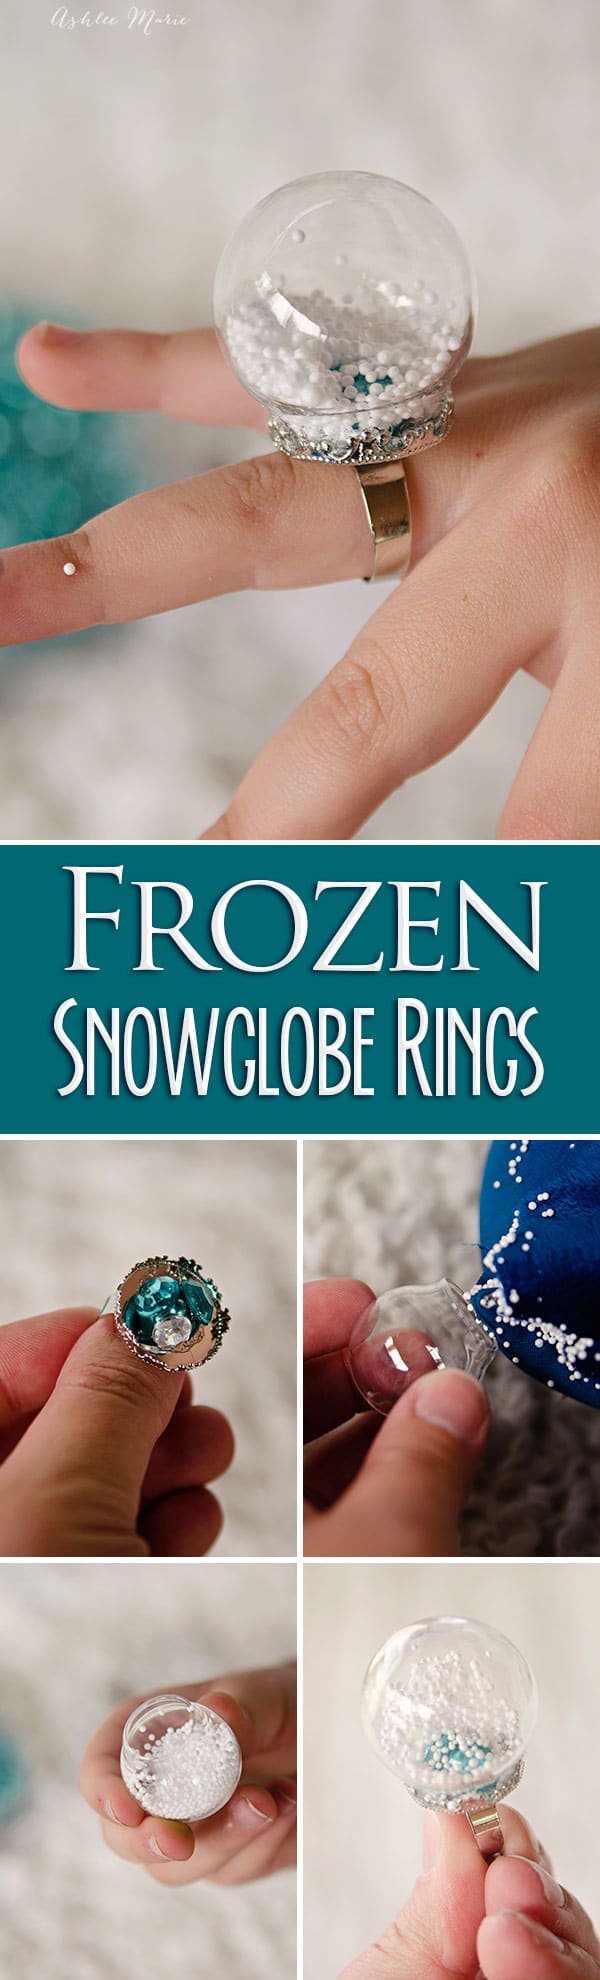 a fun craft at any party, make your own snow globe rings, fill with anything you want